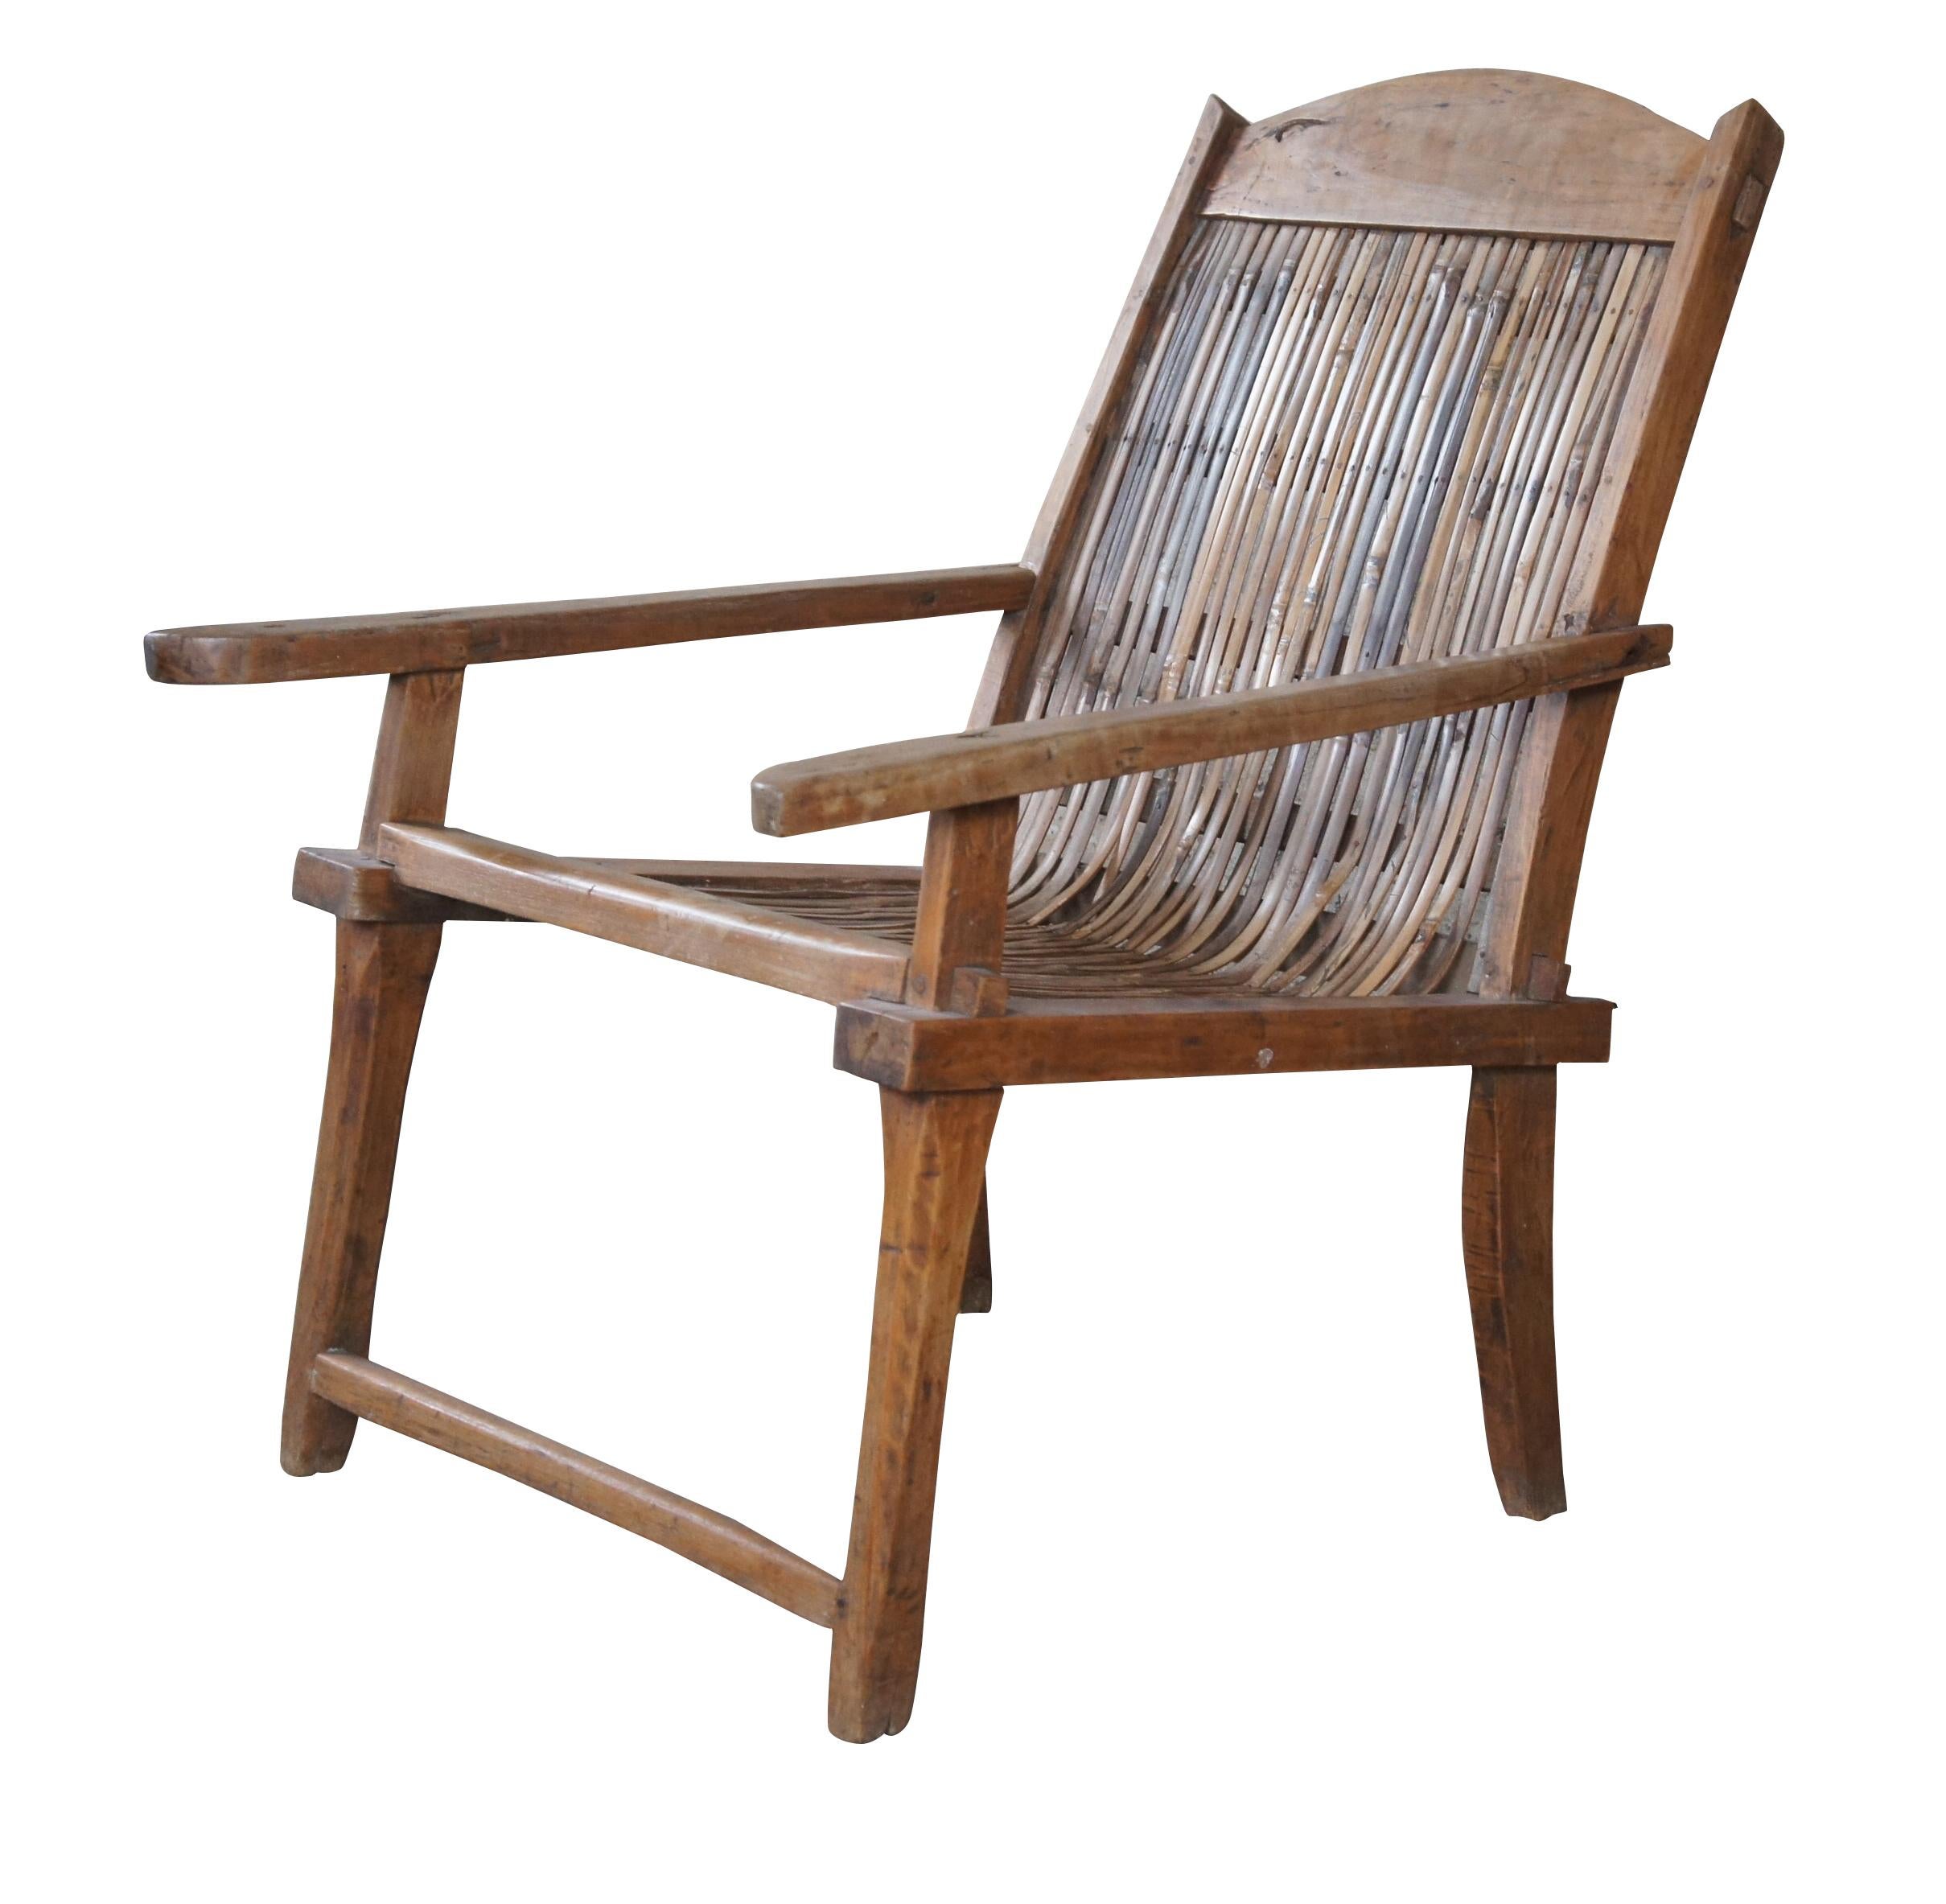 Early 20th century British Colonial Anglo Indian plantation chair. Made from teak in mortise and tenon joinery with a relaxed lounged frame and long arms. Features a curved crest rail and split reed bent rattan seat.

There's nothing better than